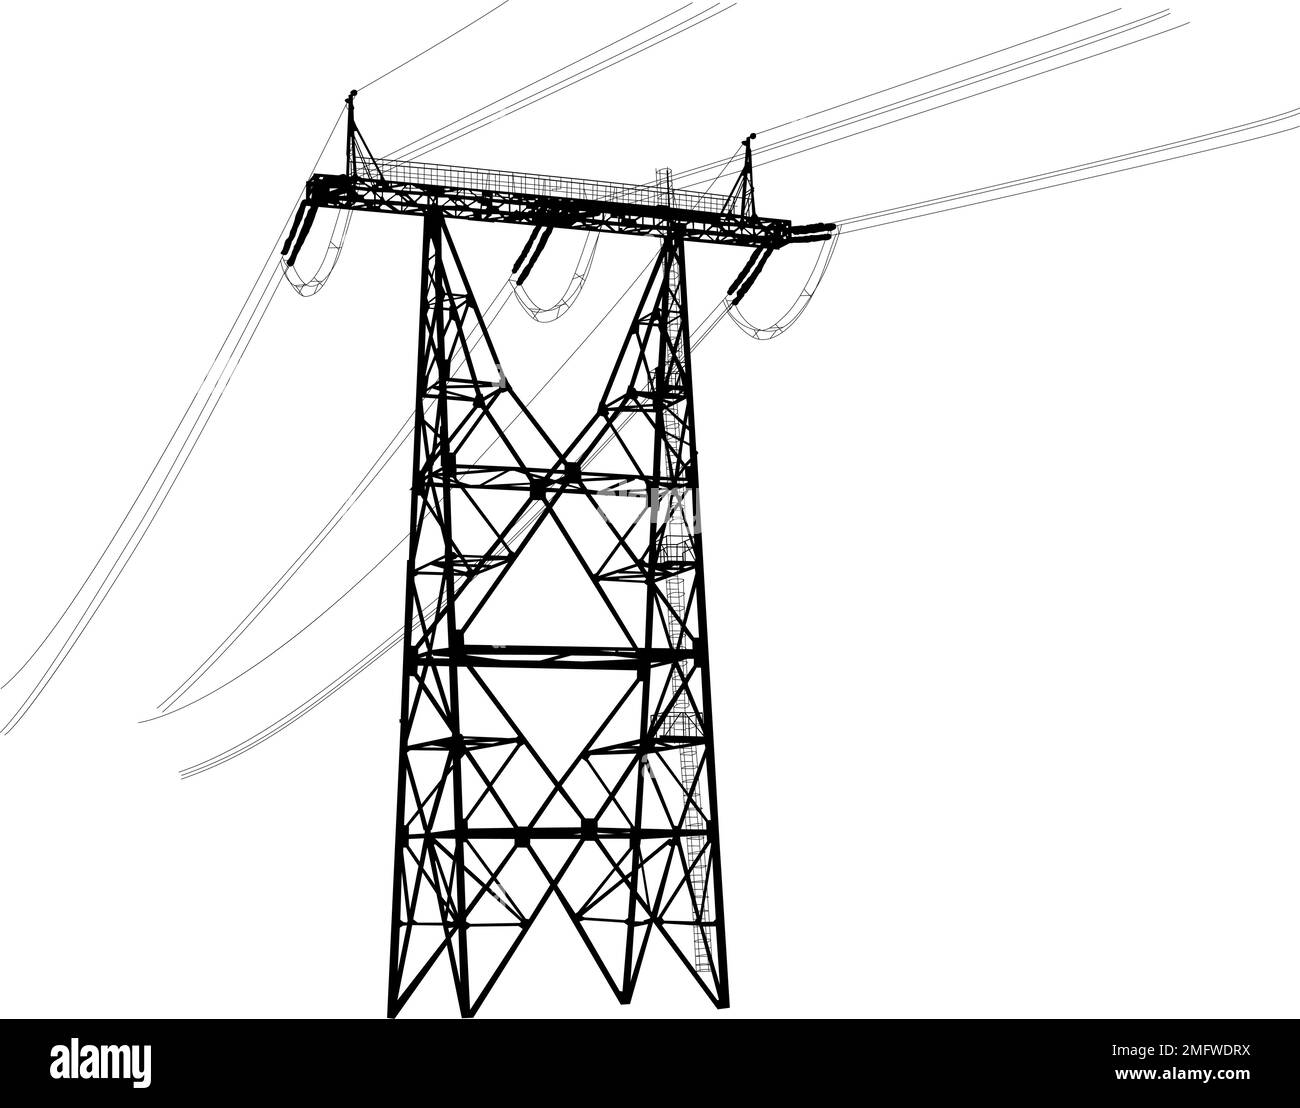 Silhouette of high voltage power lines on a white background. Stock Vector